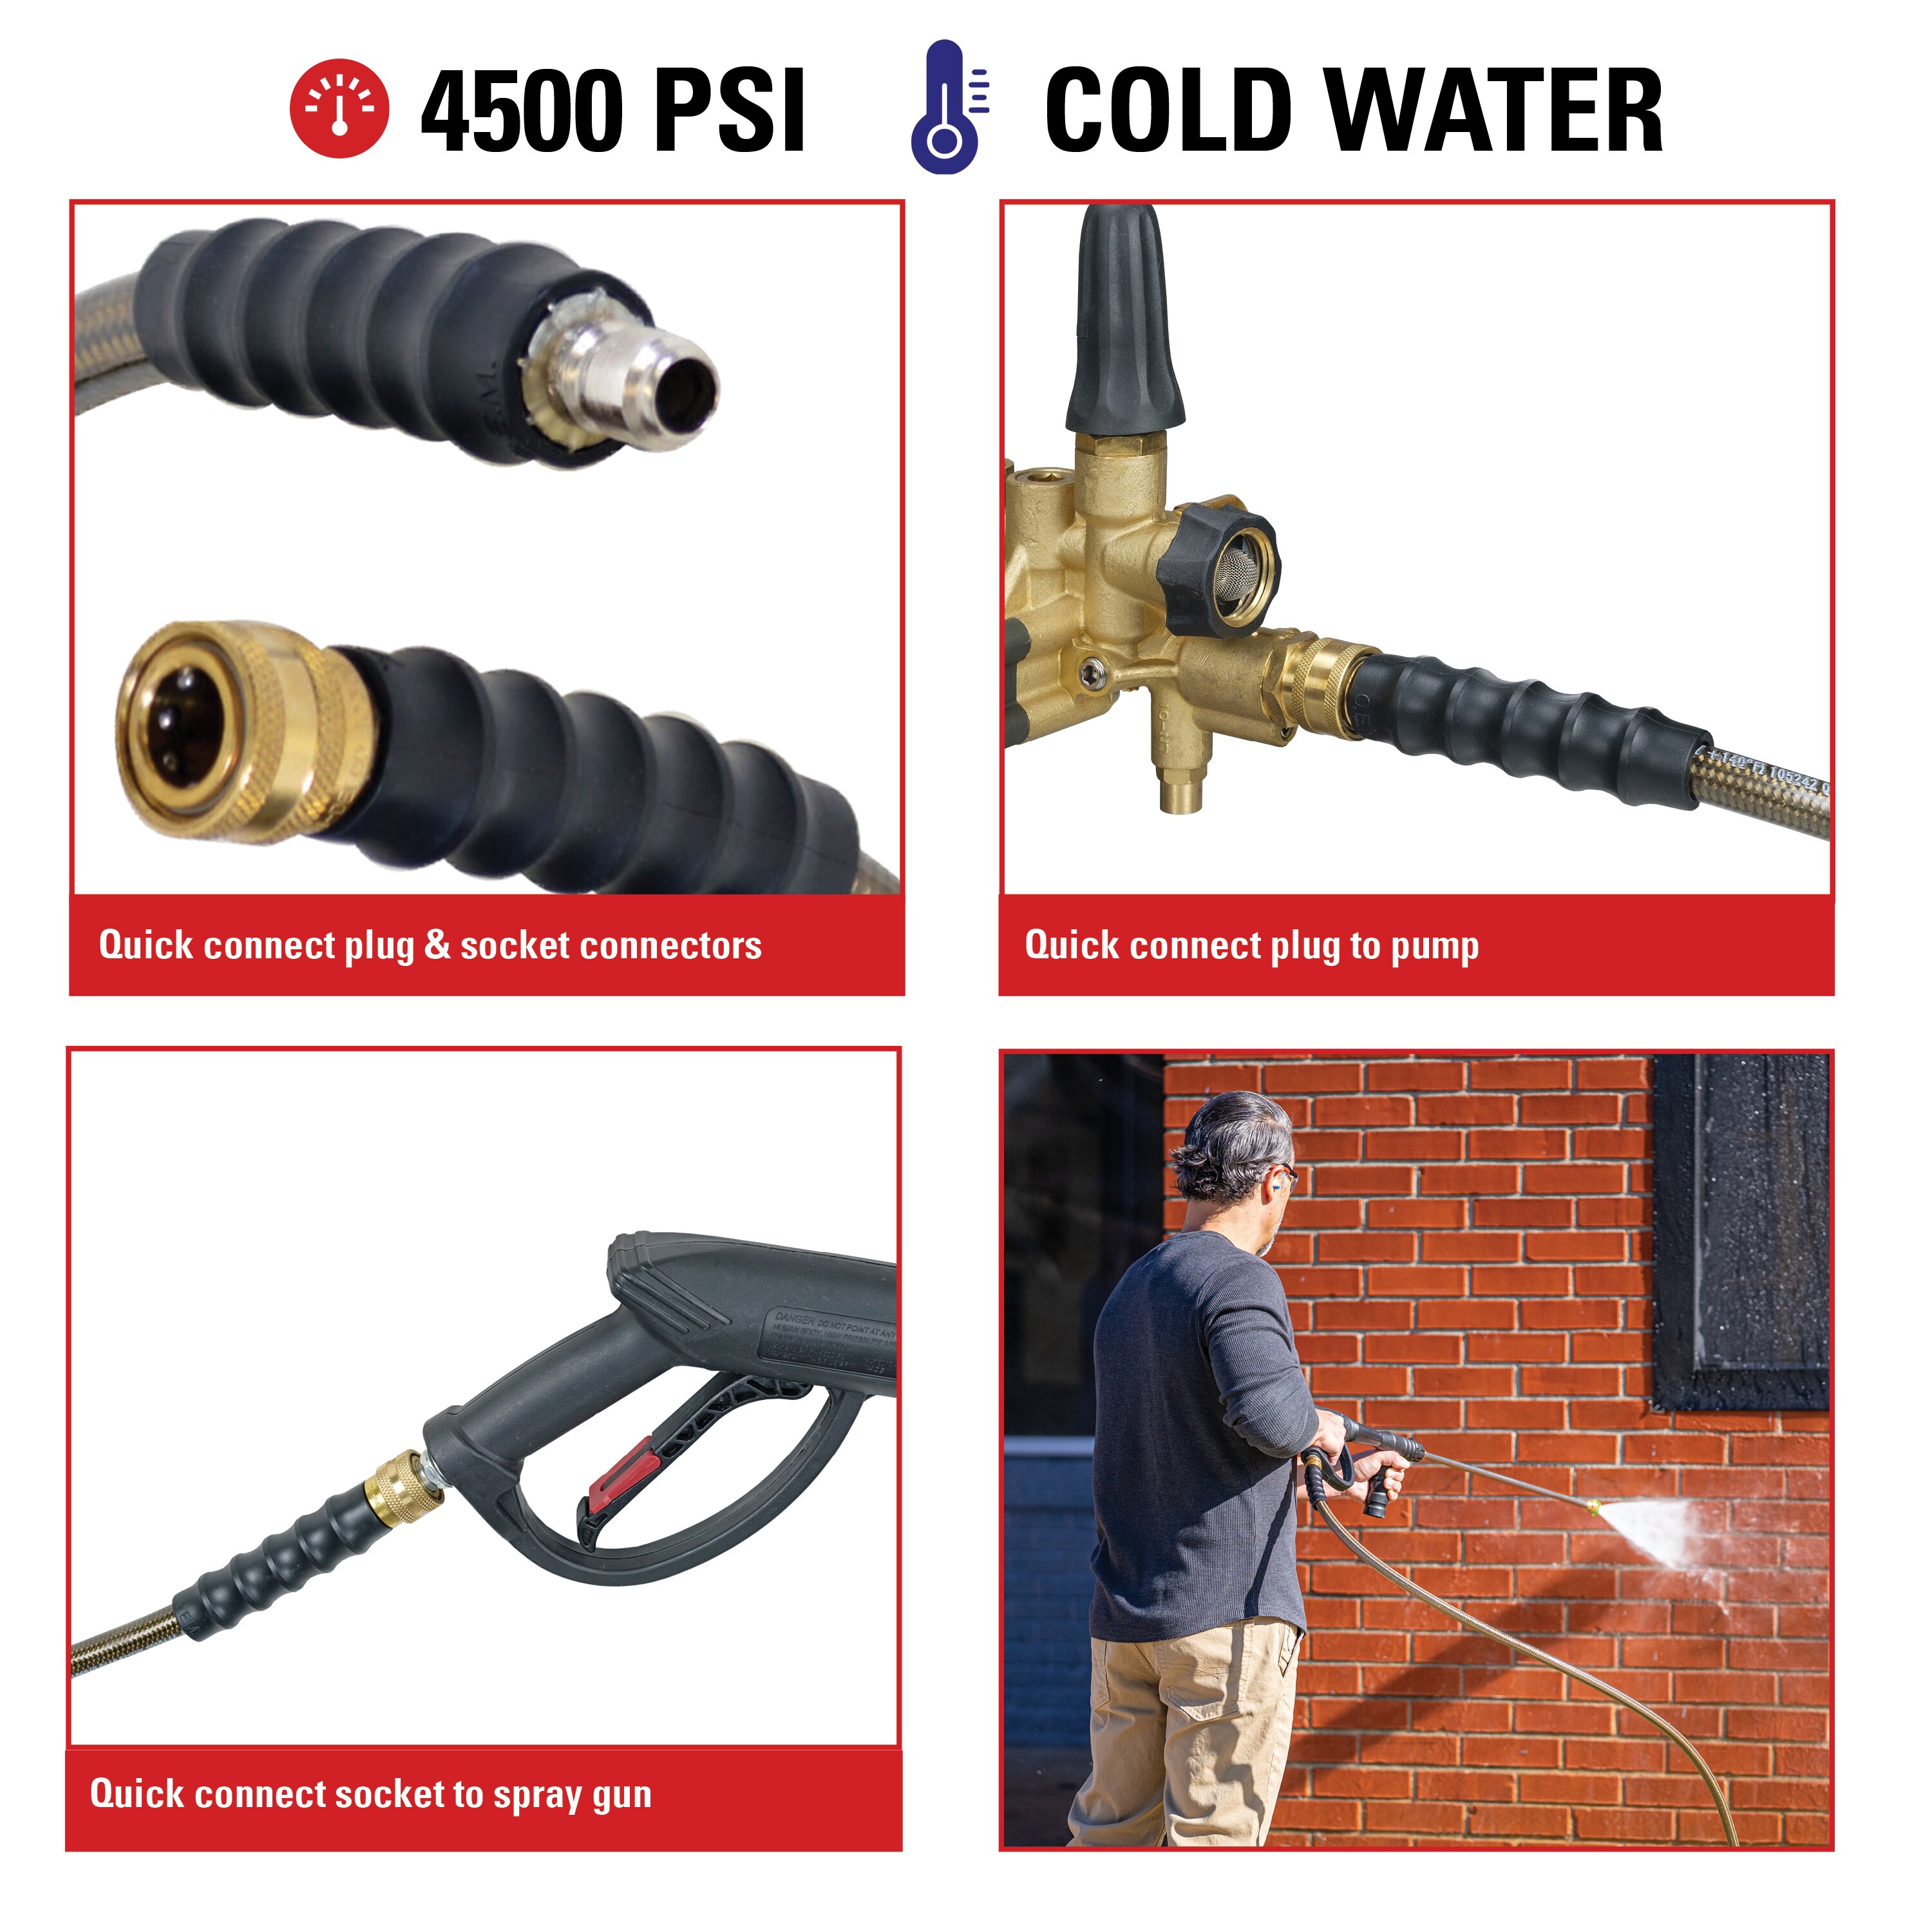 PWACCS Pressure Washer Siphon Hose with Filter, Downstream Soap Chemical  Injector Parts for Power Washing, 10 Feet, 2 Filters